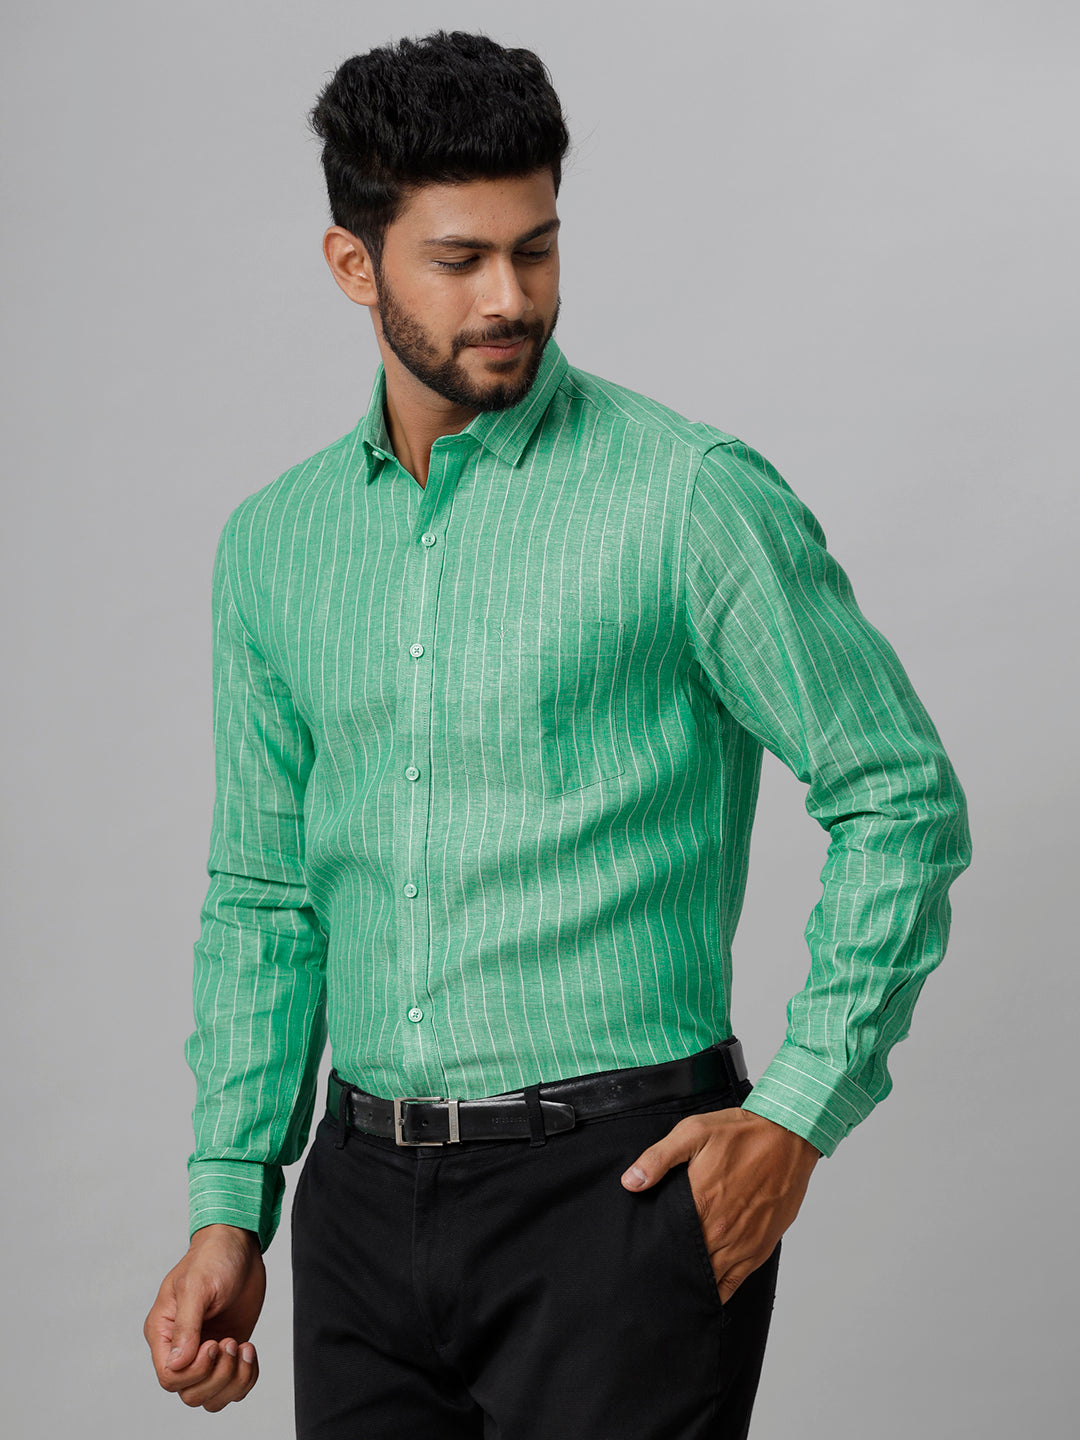 Mens Pure Linen Striped Full Sleeves Green Shirt LS12-Side view